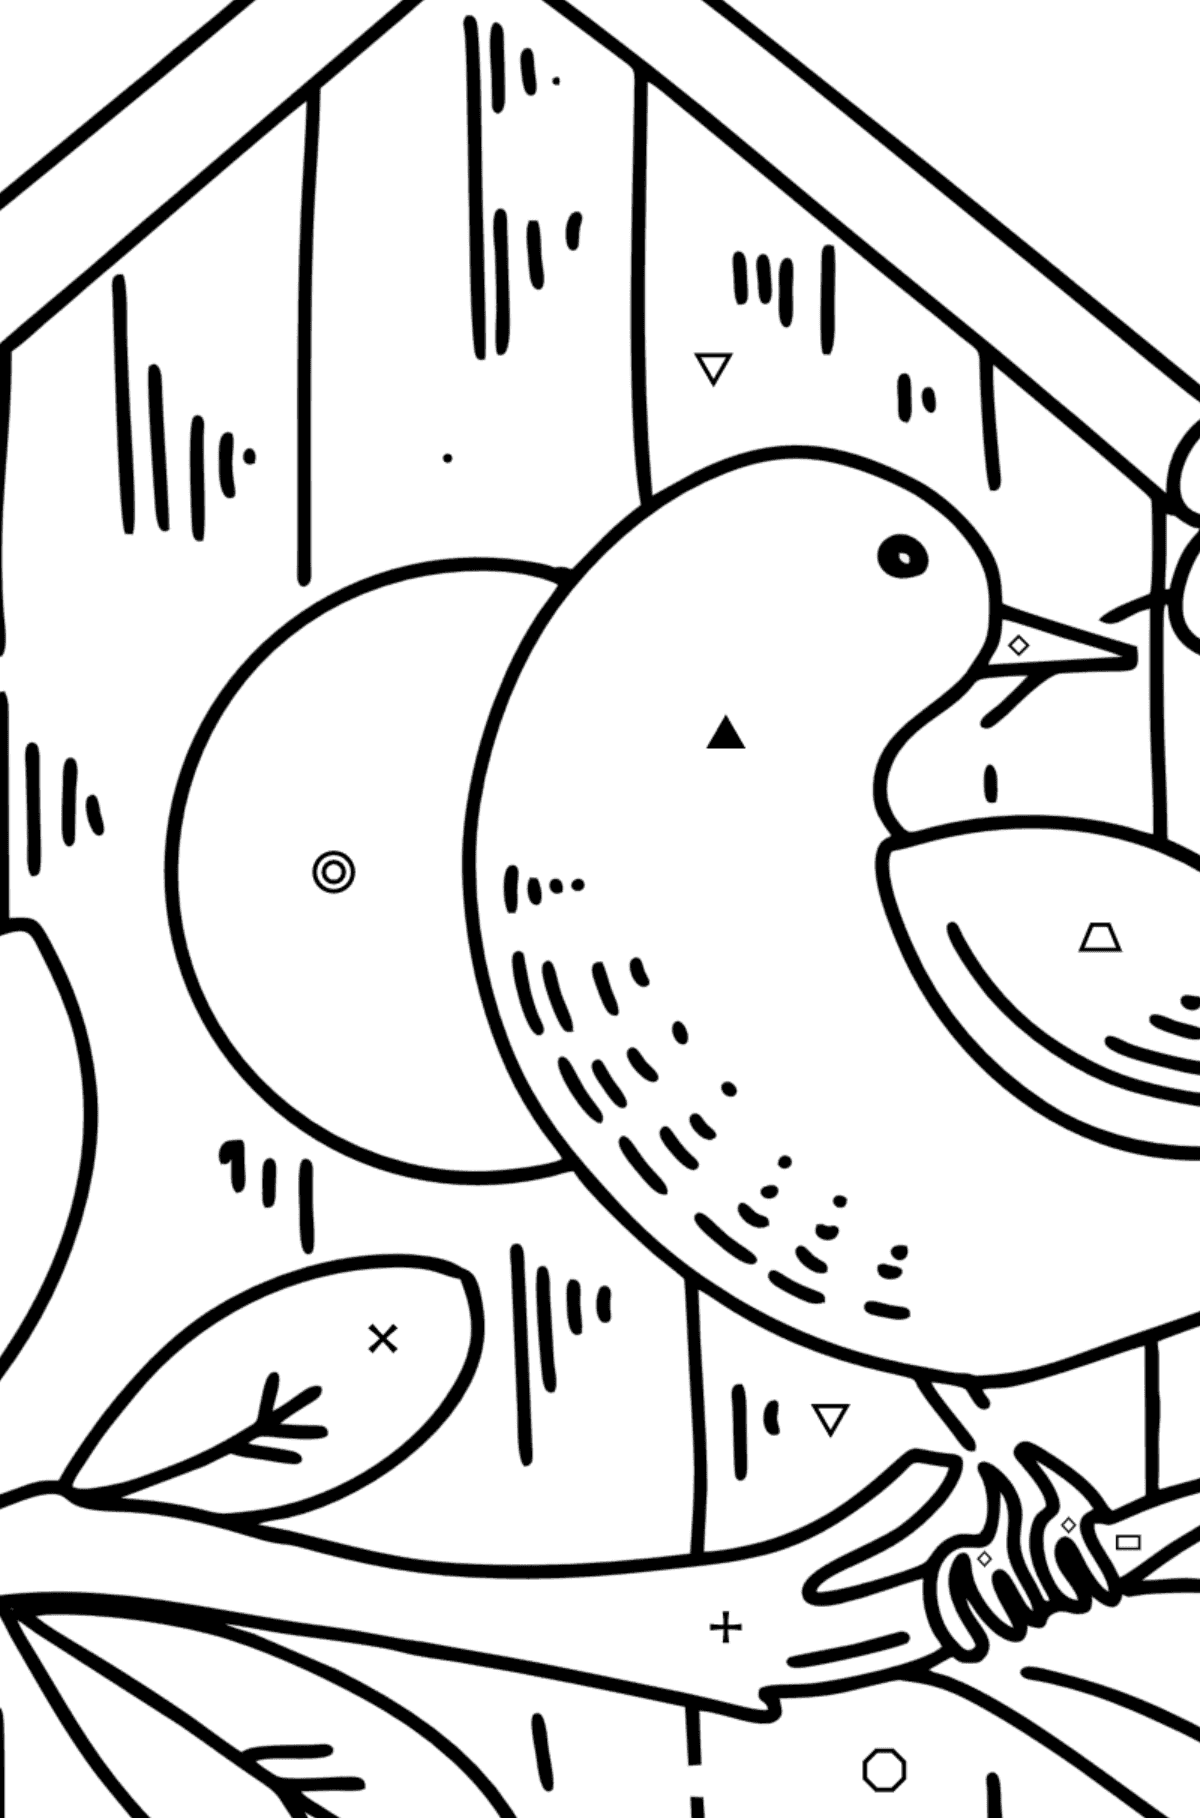 Starling at the Birdhouse coloring page - Coloring by Symbols and Geometric Shapes for Kids